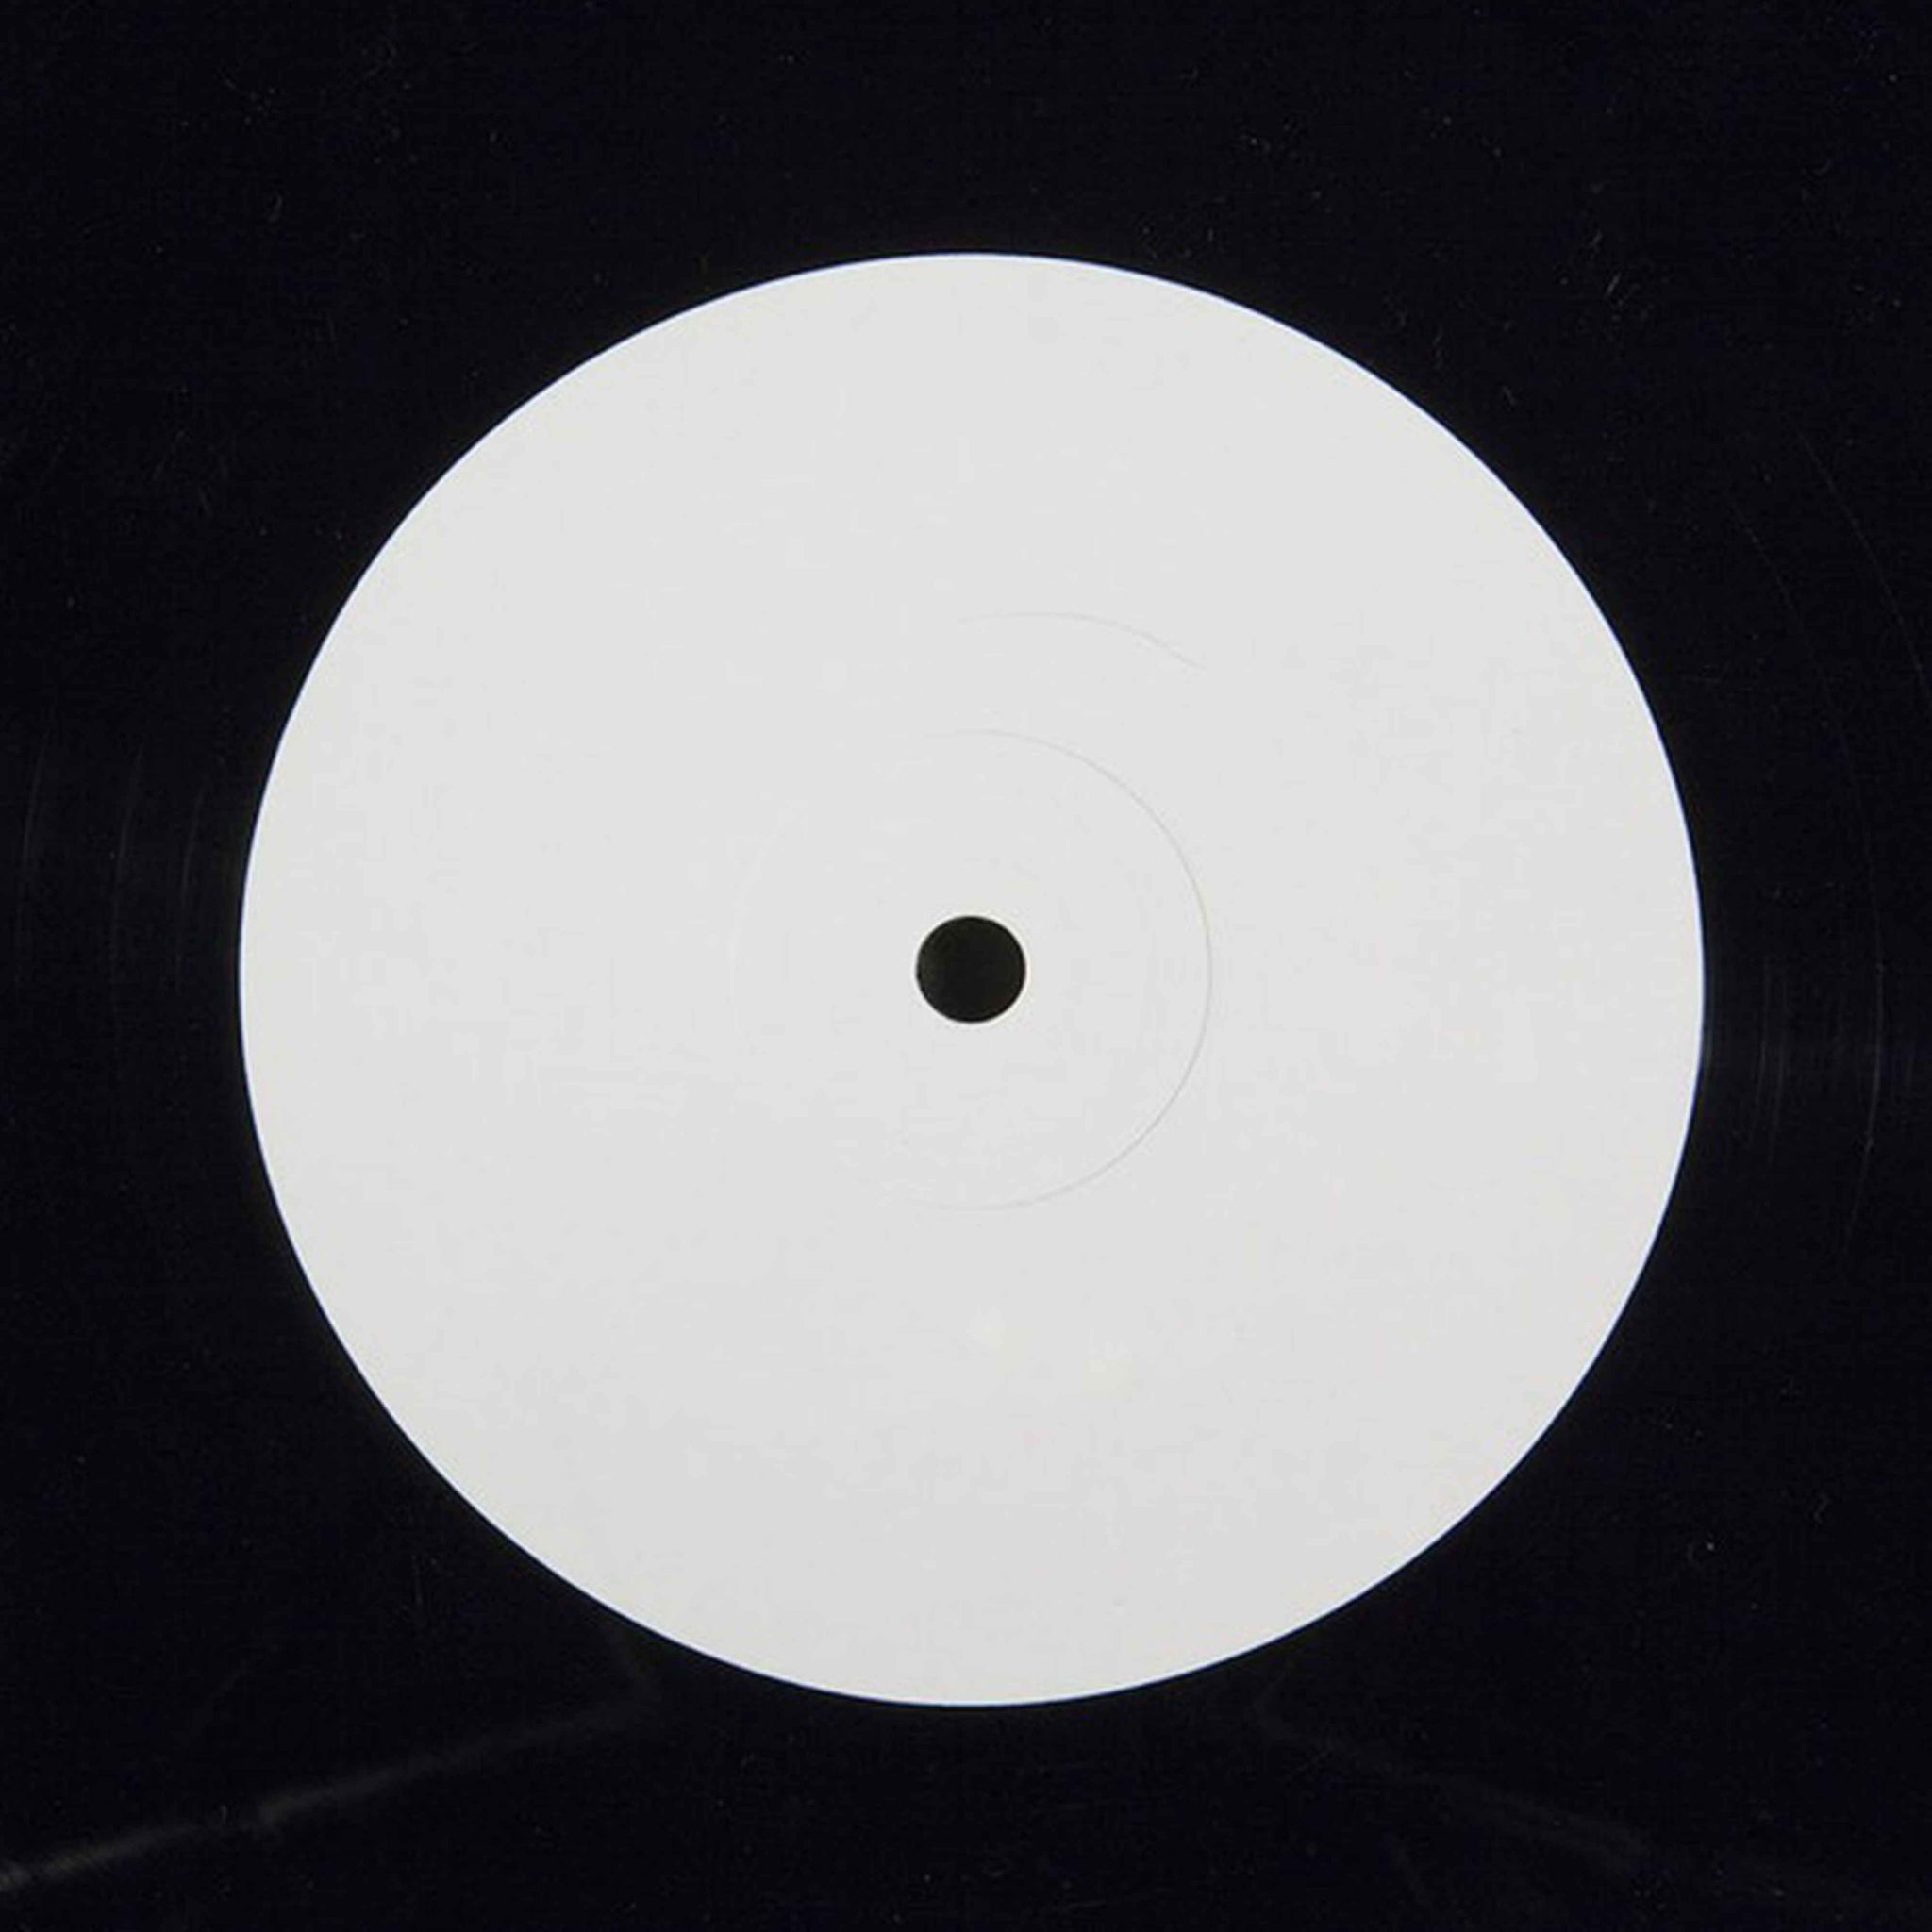 THE IMPOSTER & DJ LEWI 'SHINING / TRANQUILITY' 12" (REISSUE)